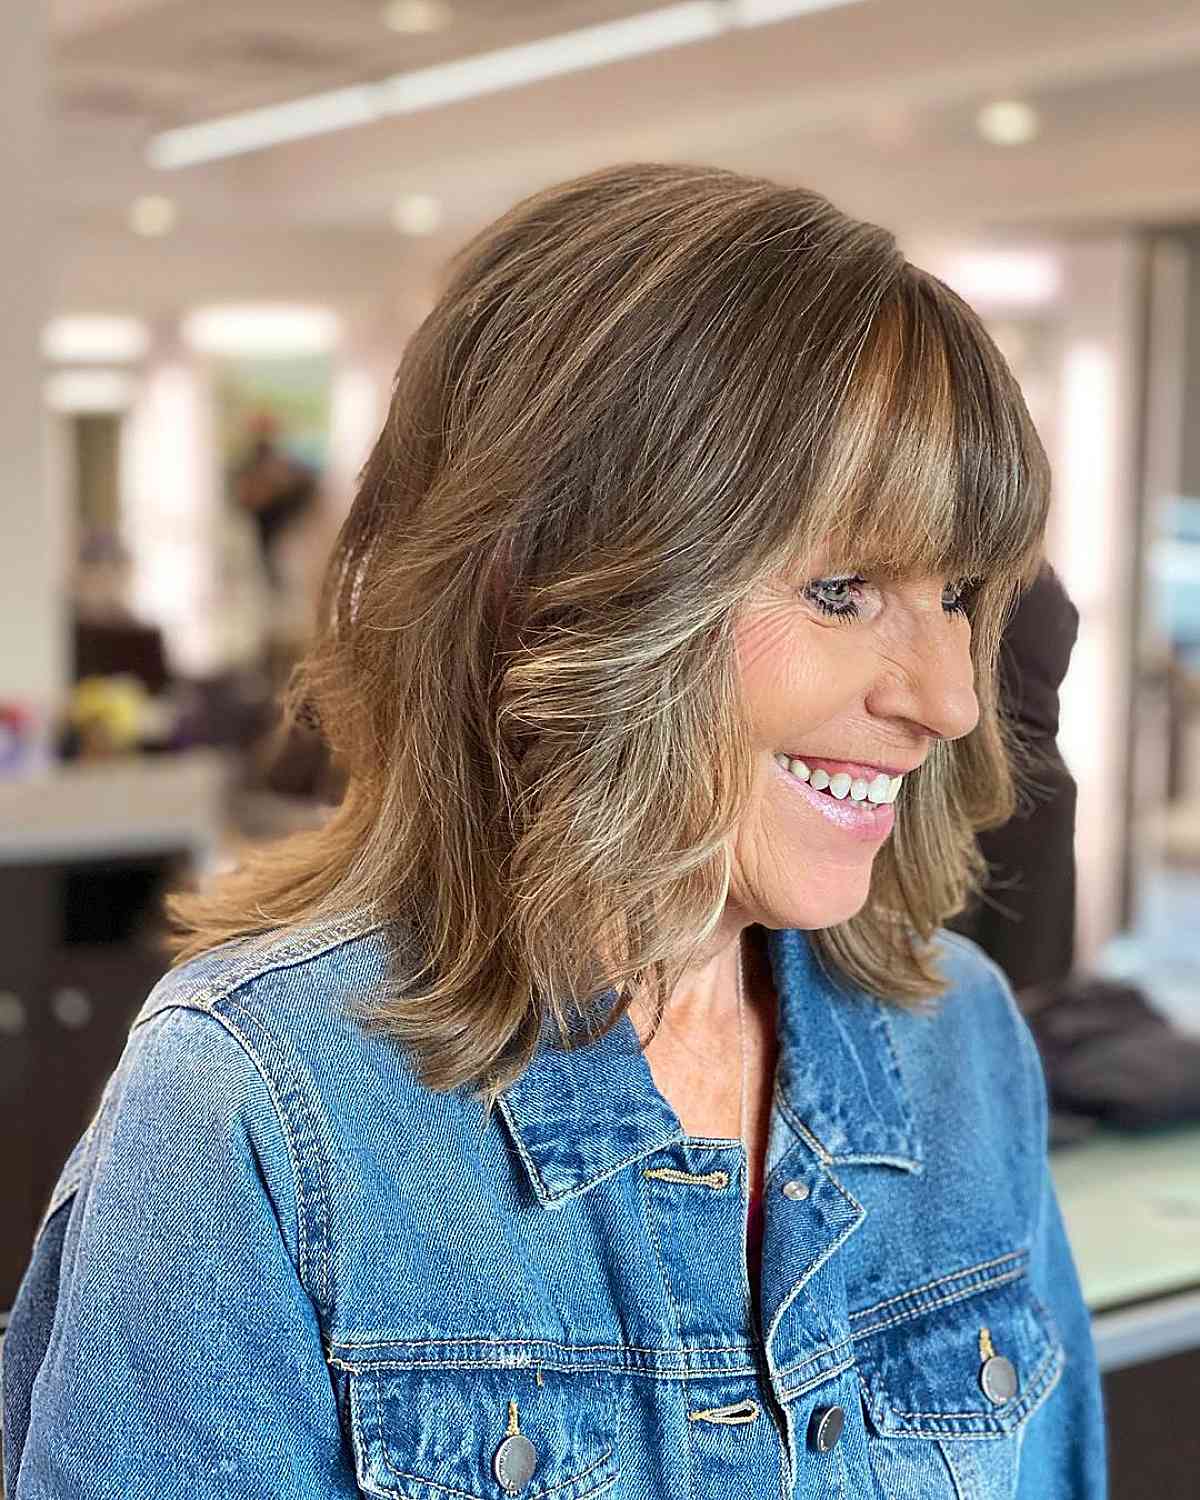 Top 10 Winter Hair Colors for Women In Their 60s (2022 Season)